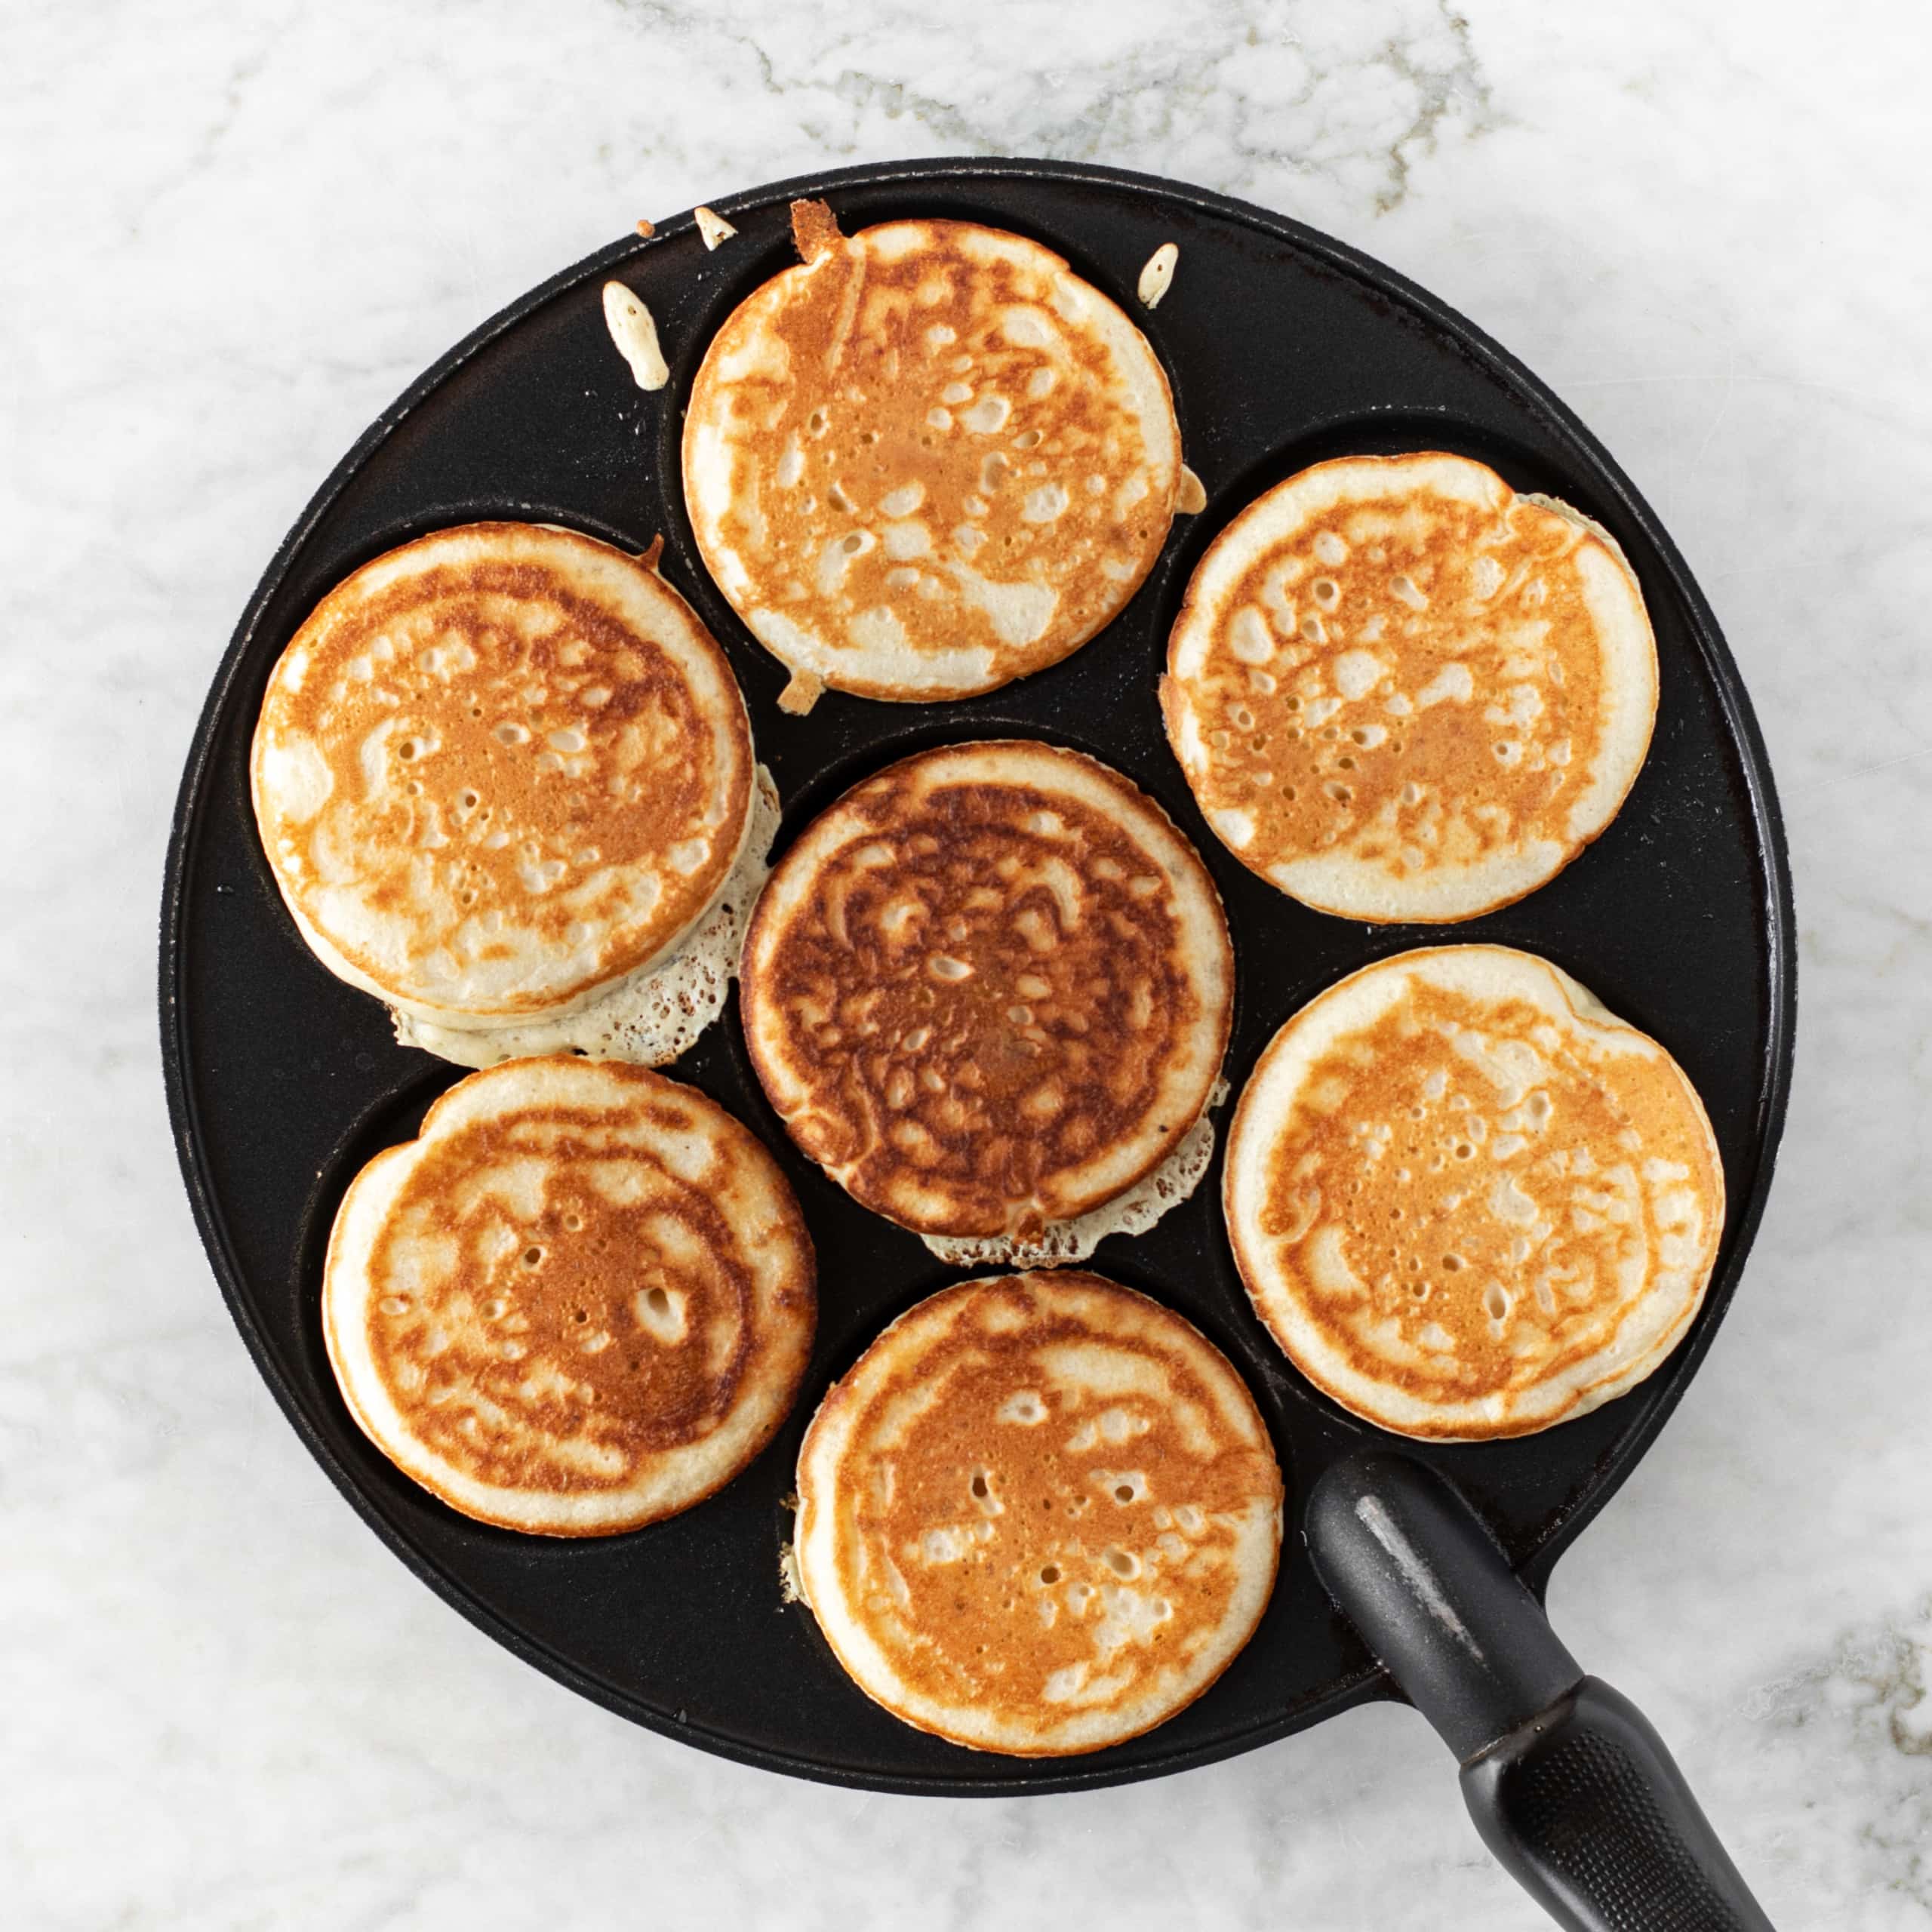 https://verygoodcook.com/wp-content/uploads/2020/06/bohemian-pancakes-livance-from-very-good-cook-blog-9688-1-2-scaled.jpg